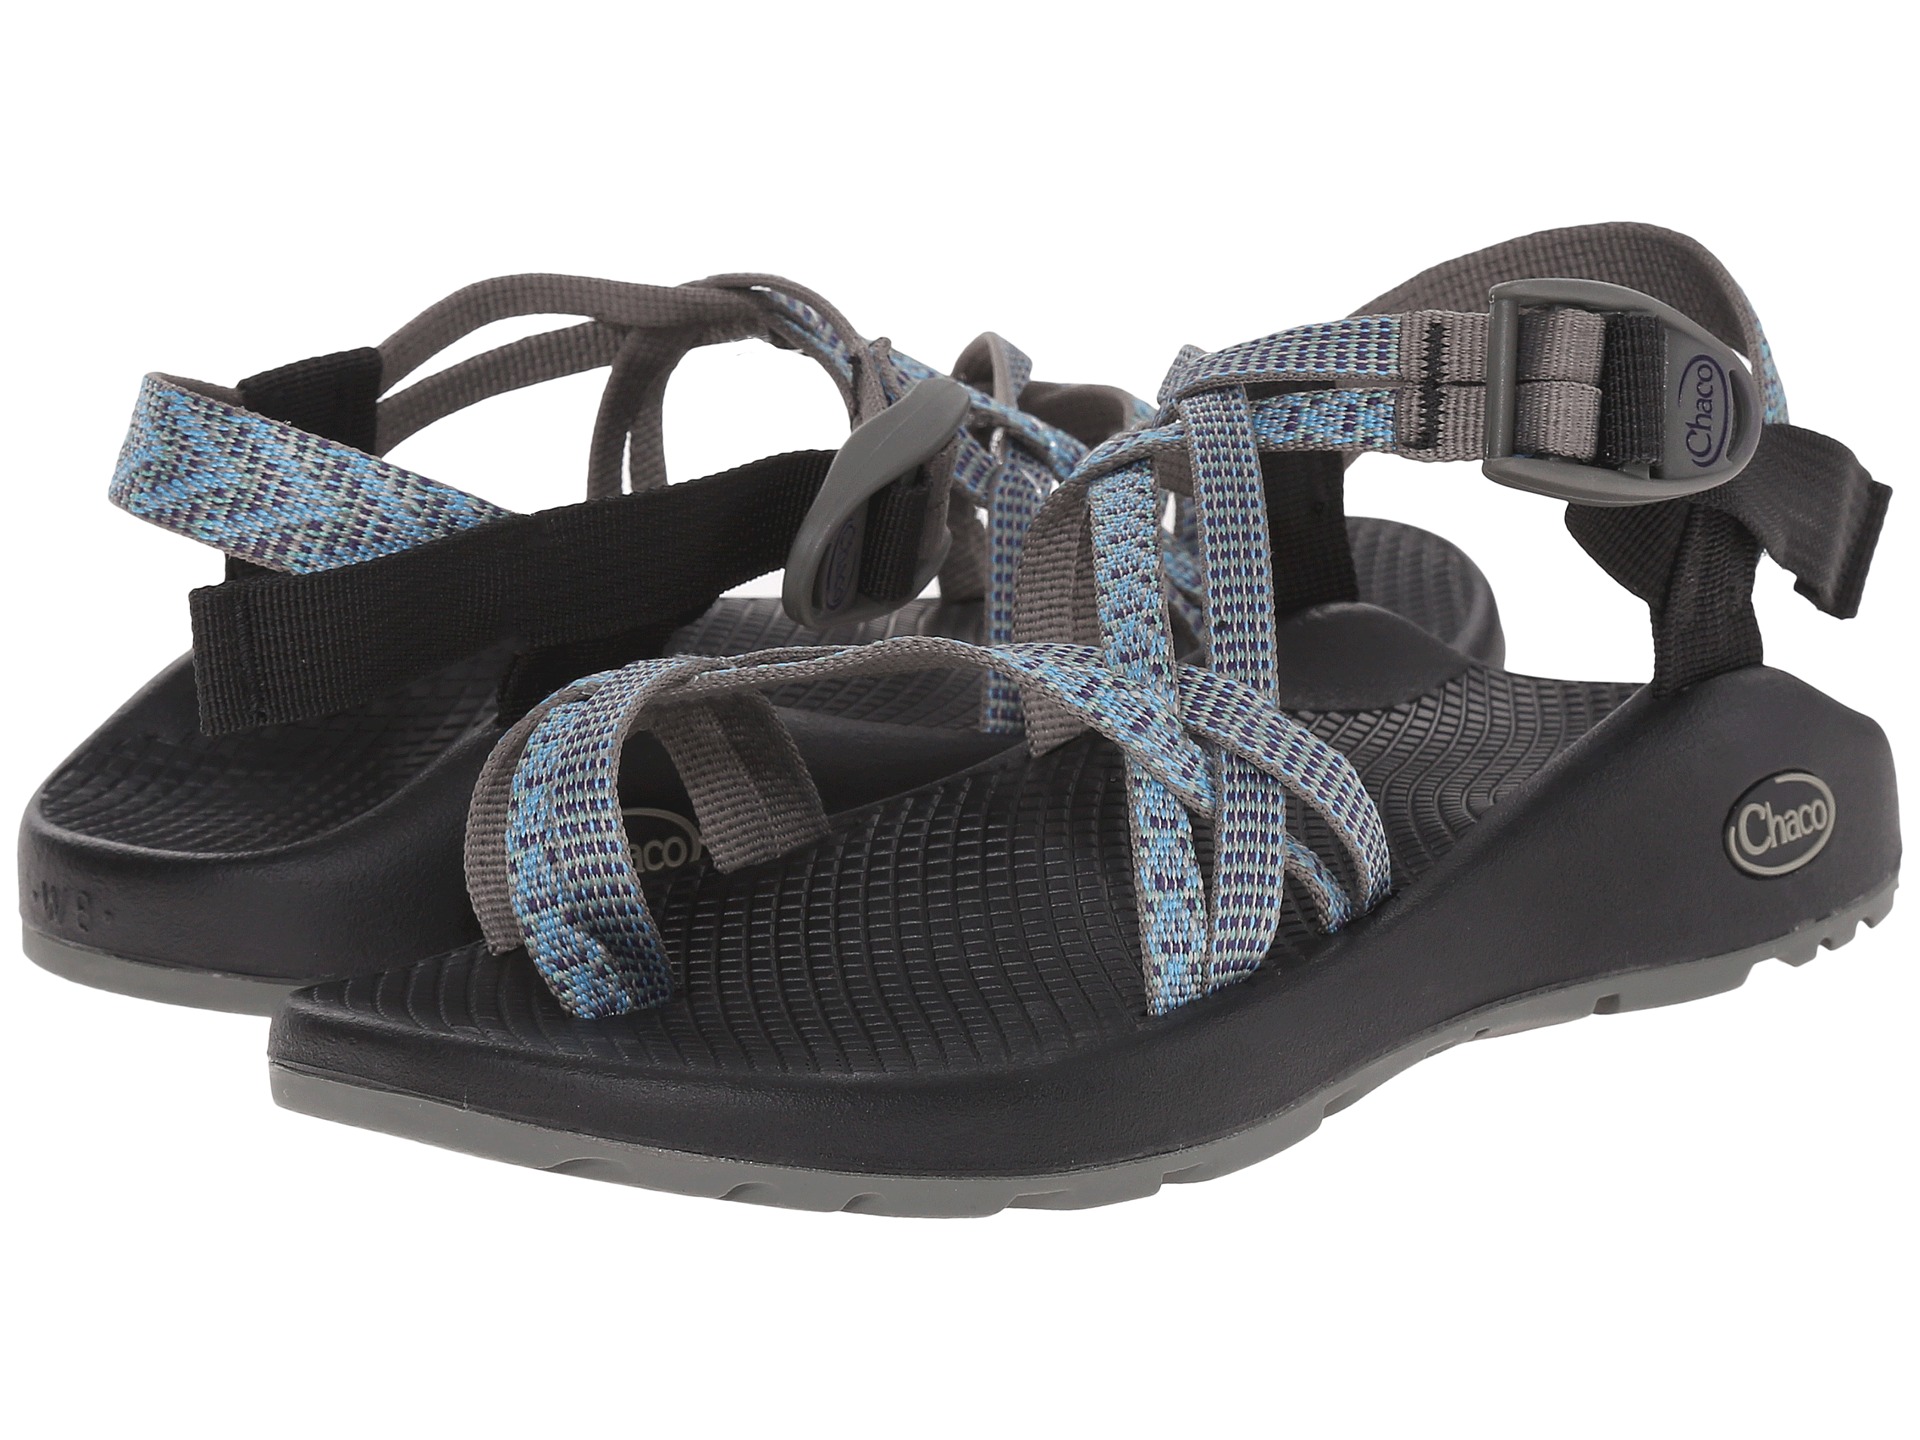 Chaco ZX/2® Classic Directional - Zappos.com Free Shipping BOTH Ways